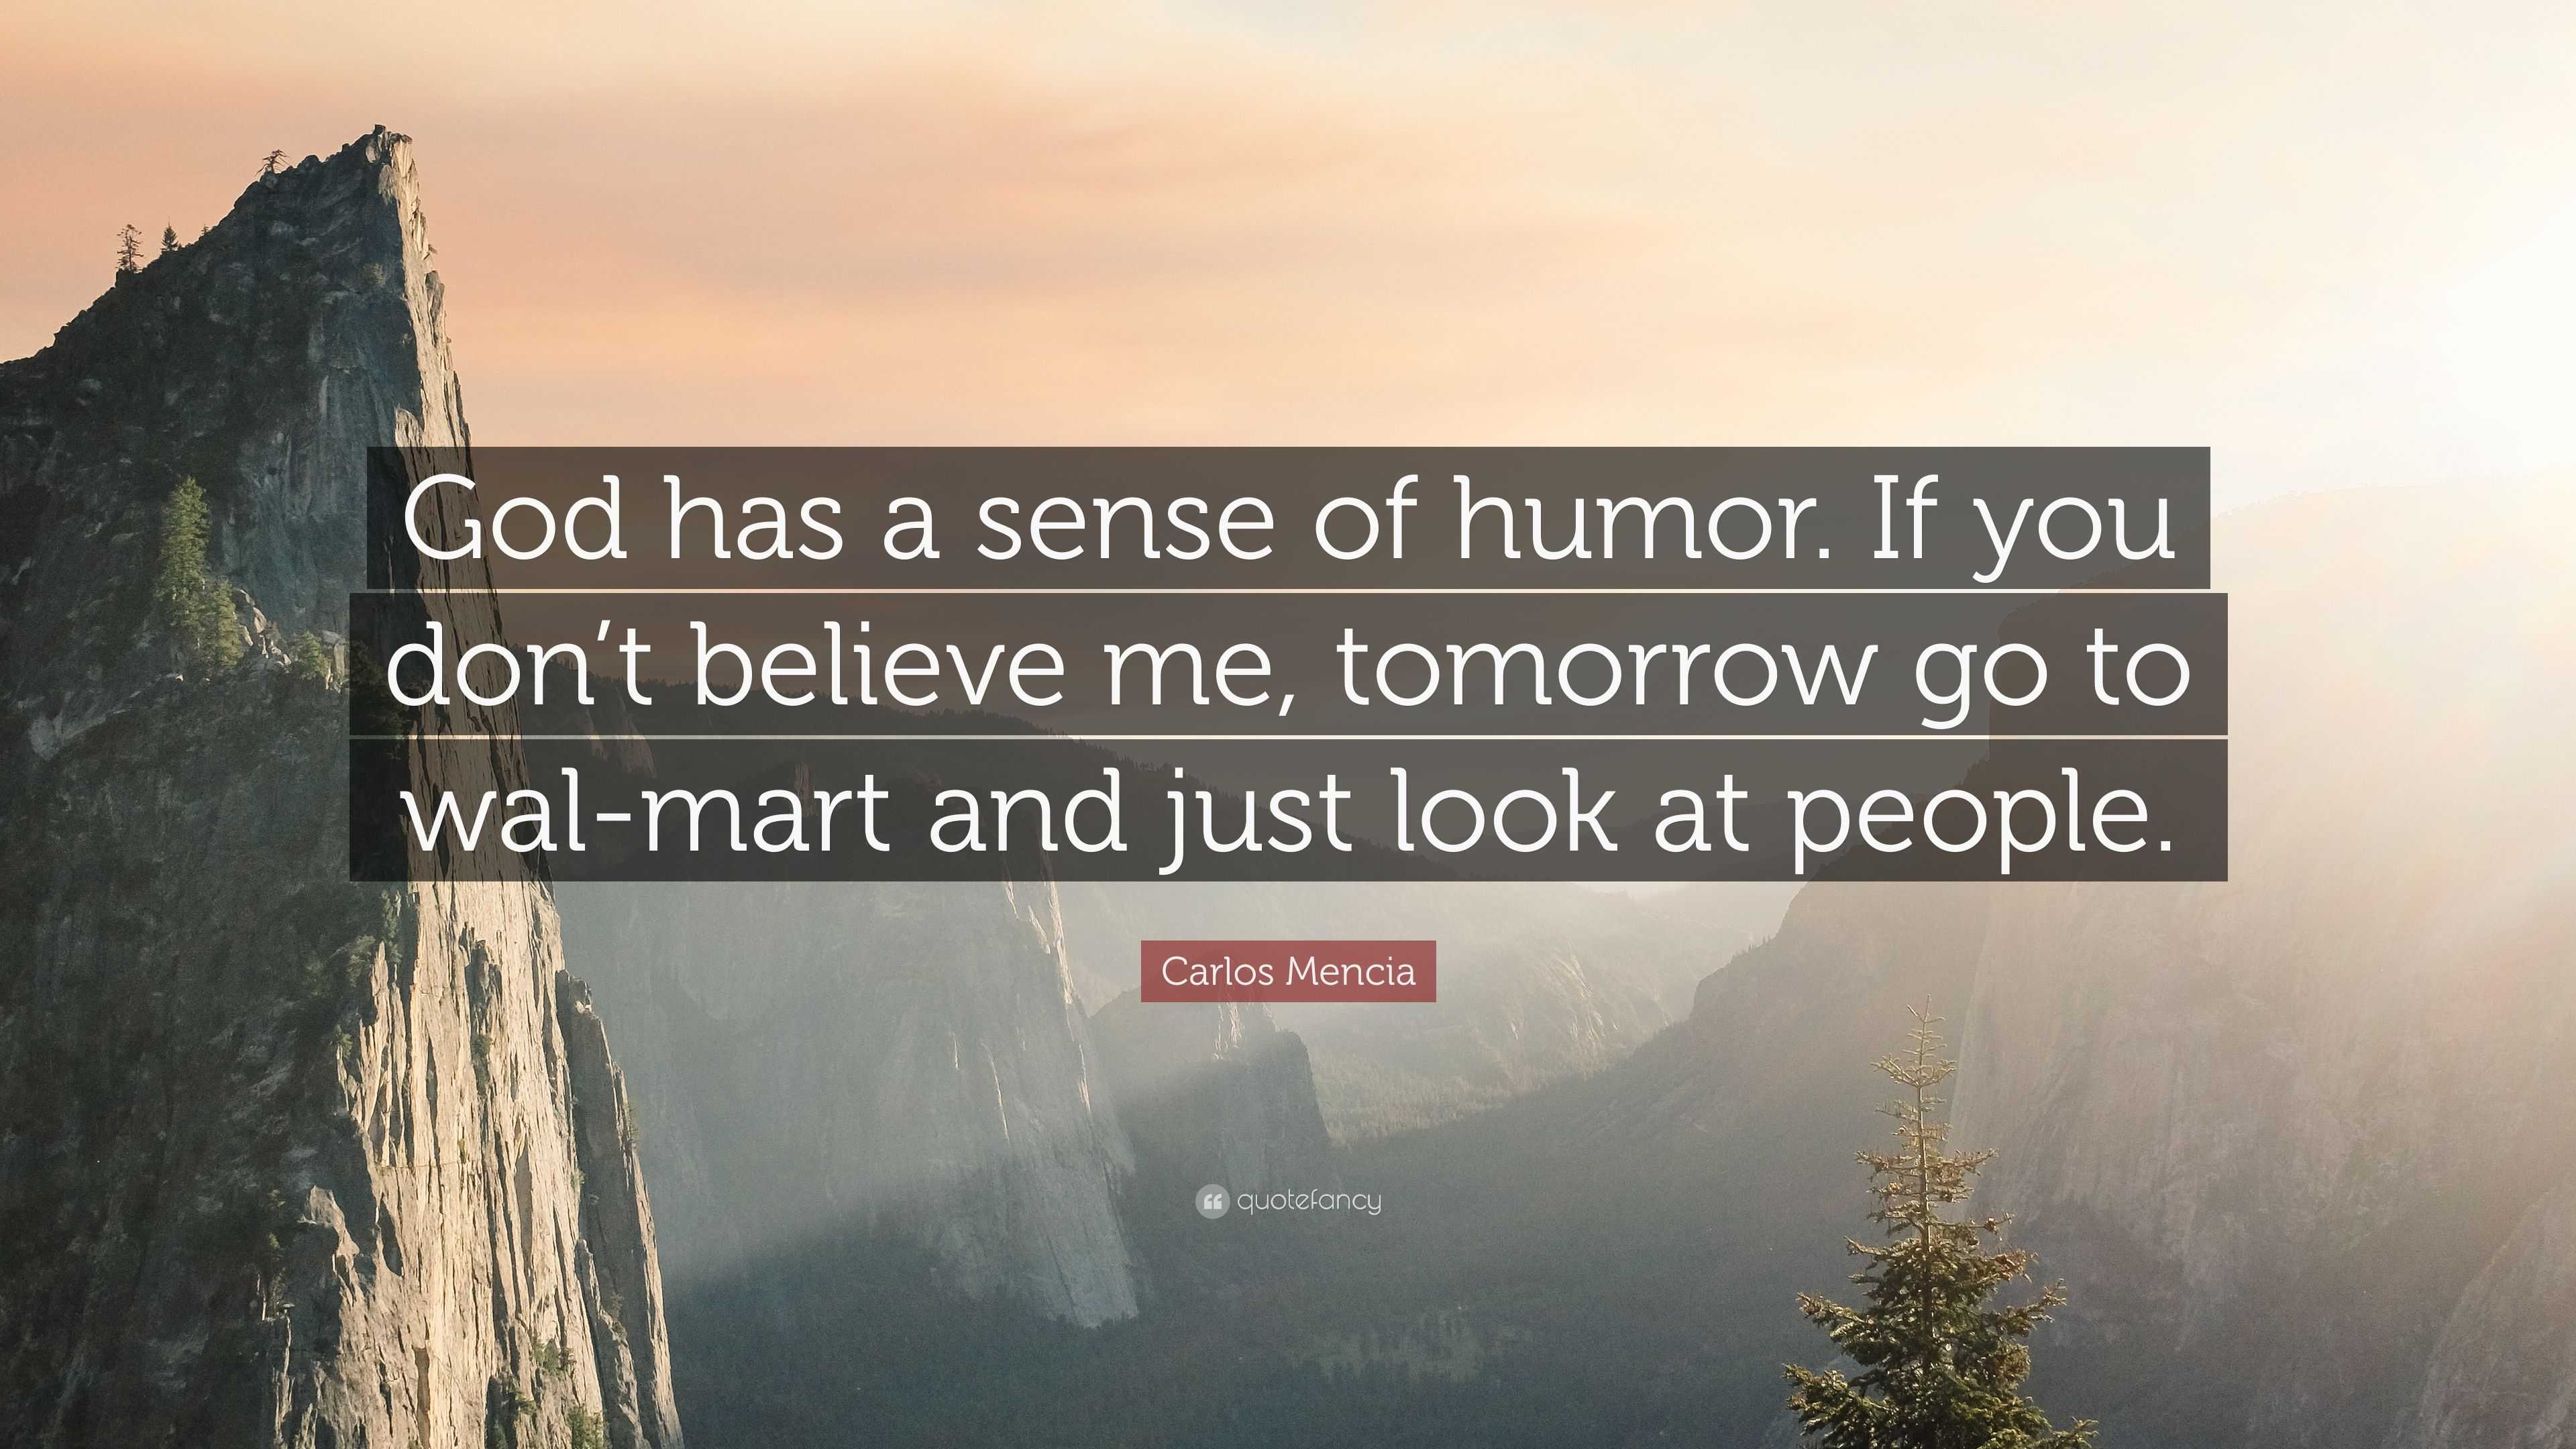 Carlos Mencia Quote: “God has a sense of humor. If you don’t believe me